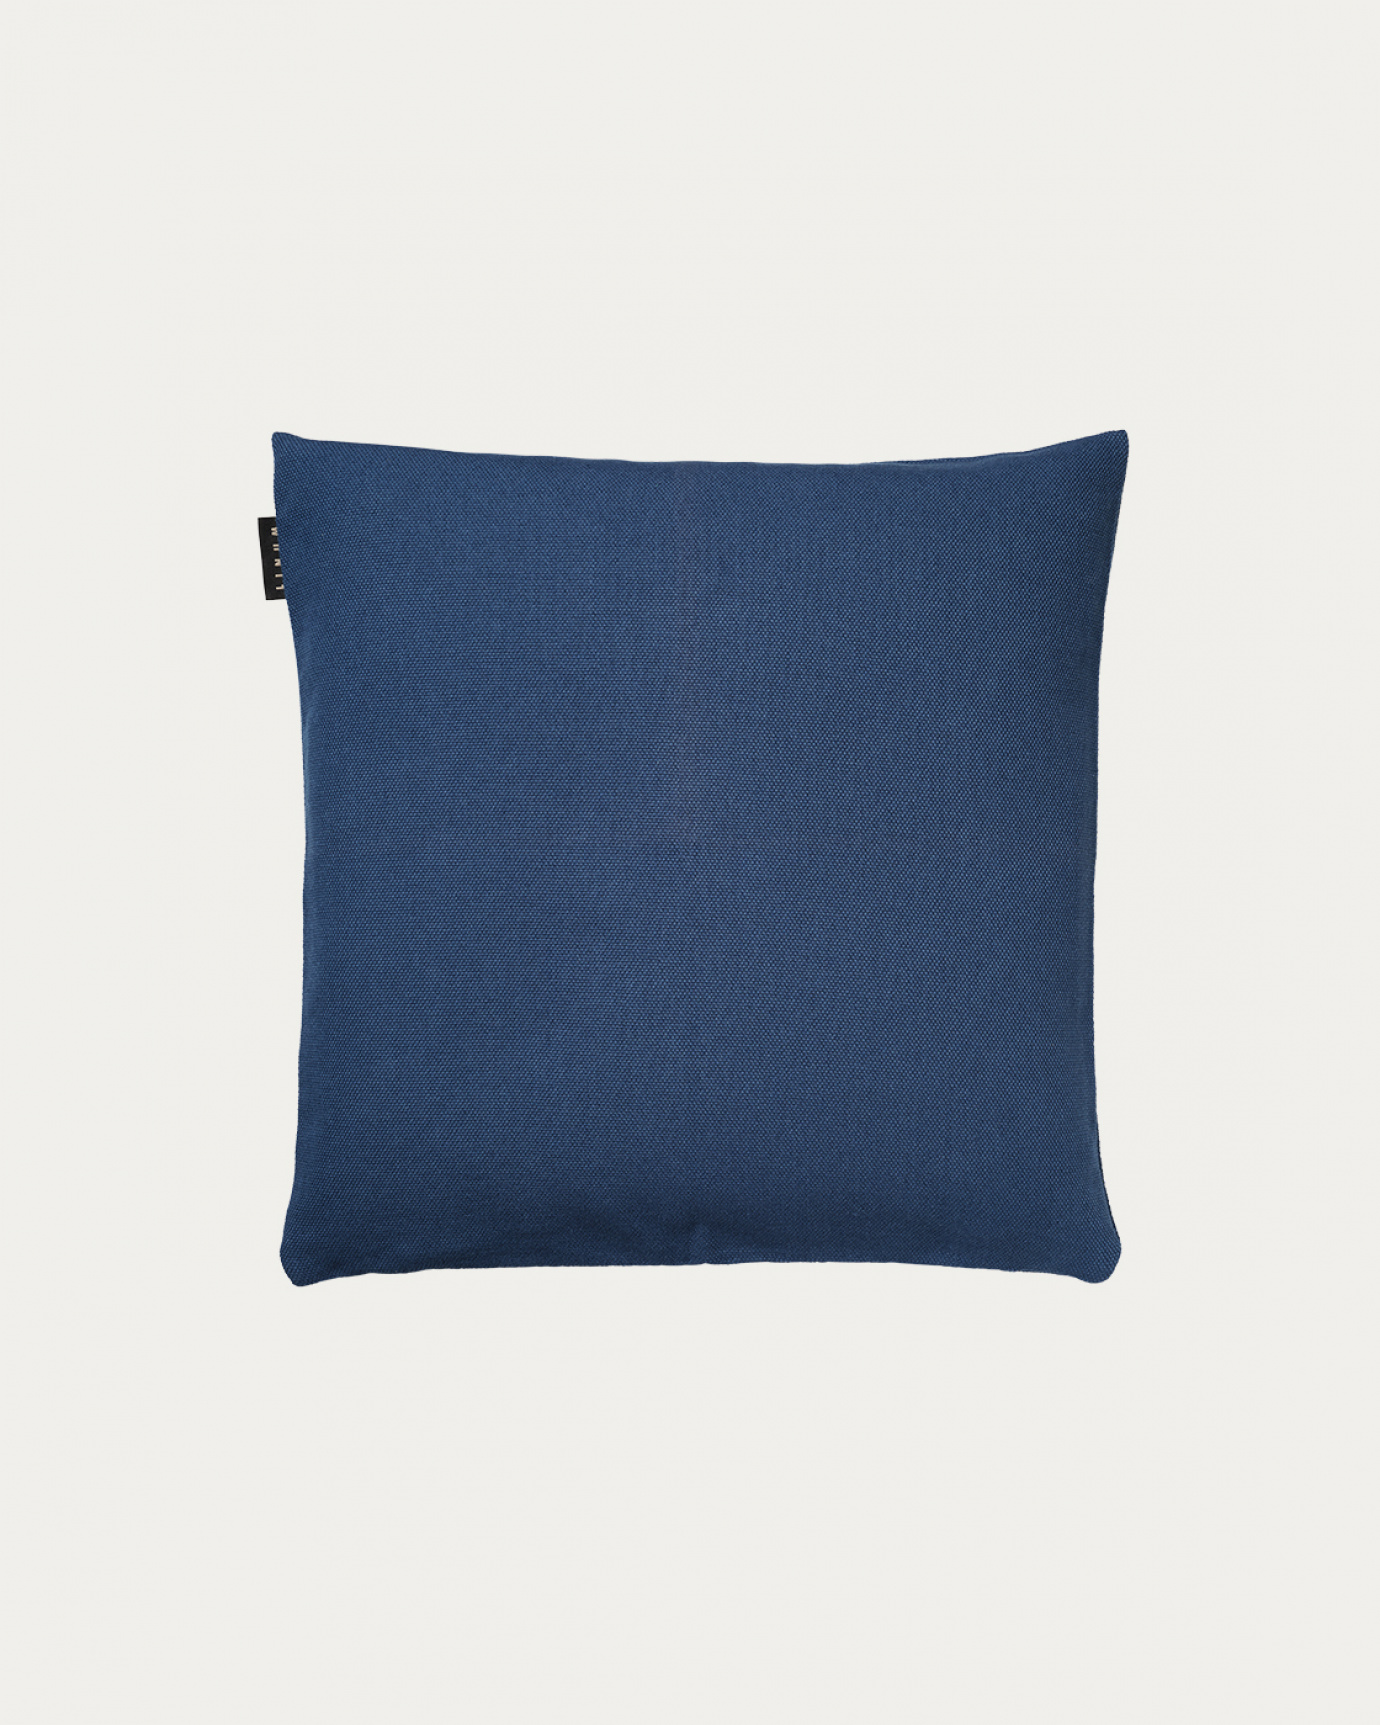 Product image indigo blue PEPPER cushion cover made of soft cotton from LINUM DESIGN. Easy to wash and durable for generations. Size 40x40 cm.